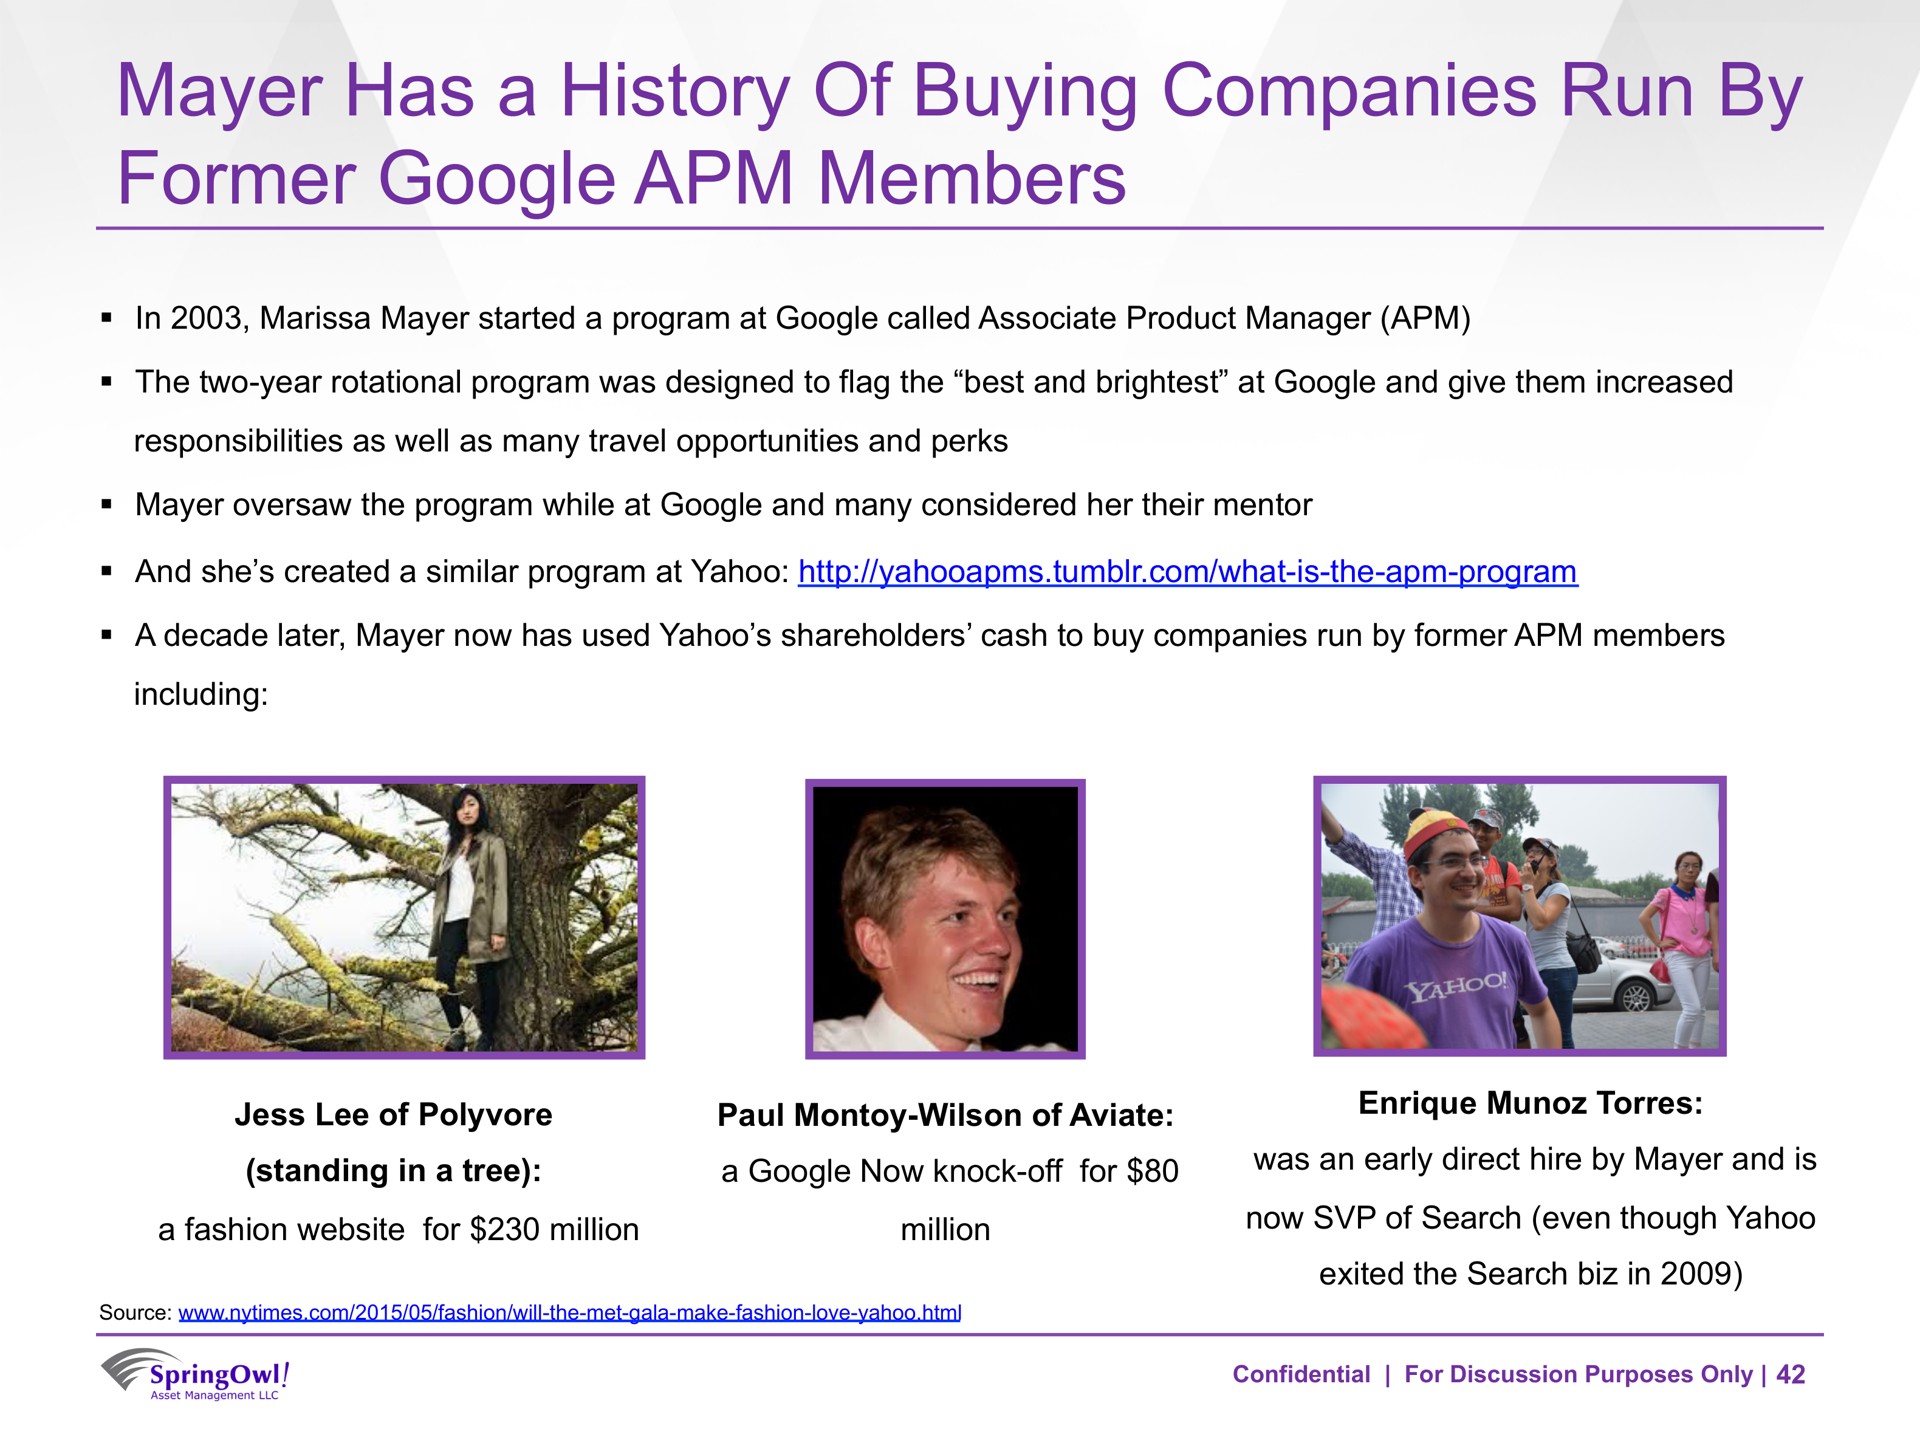 has a history of buying companies run by former members | SpringOwl